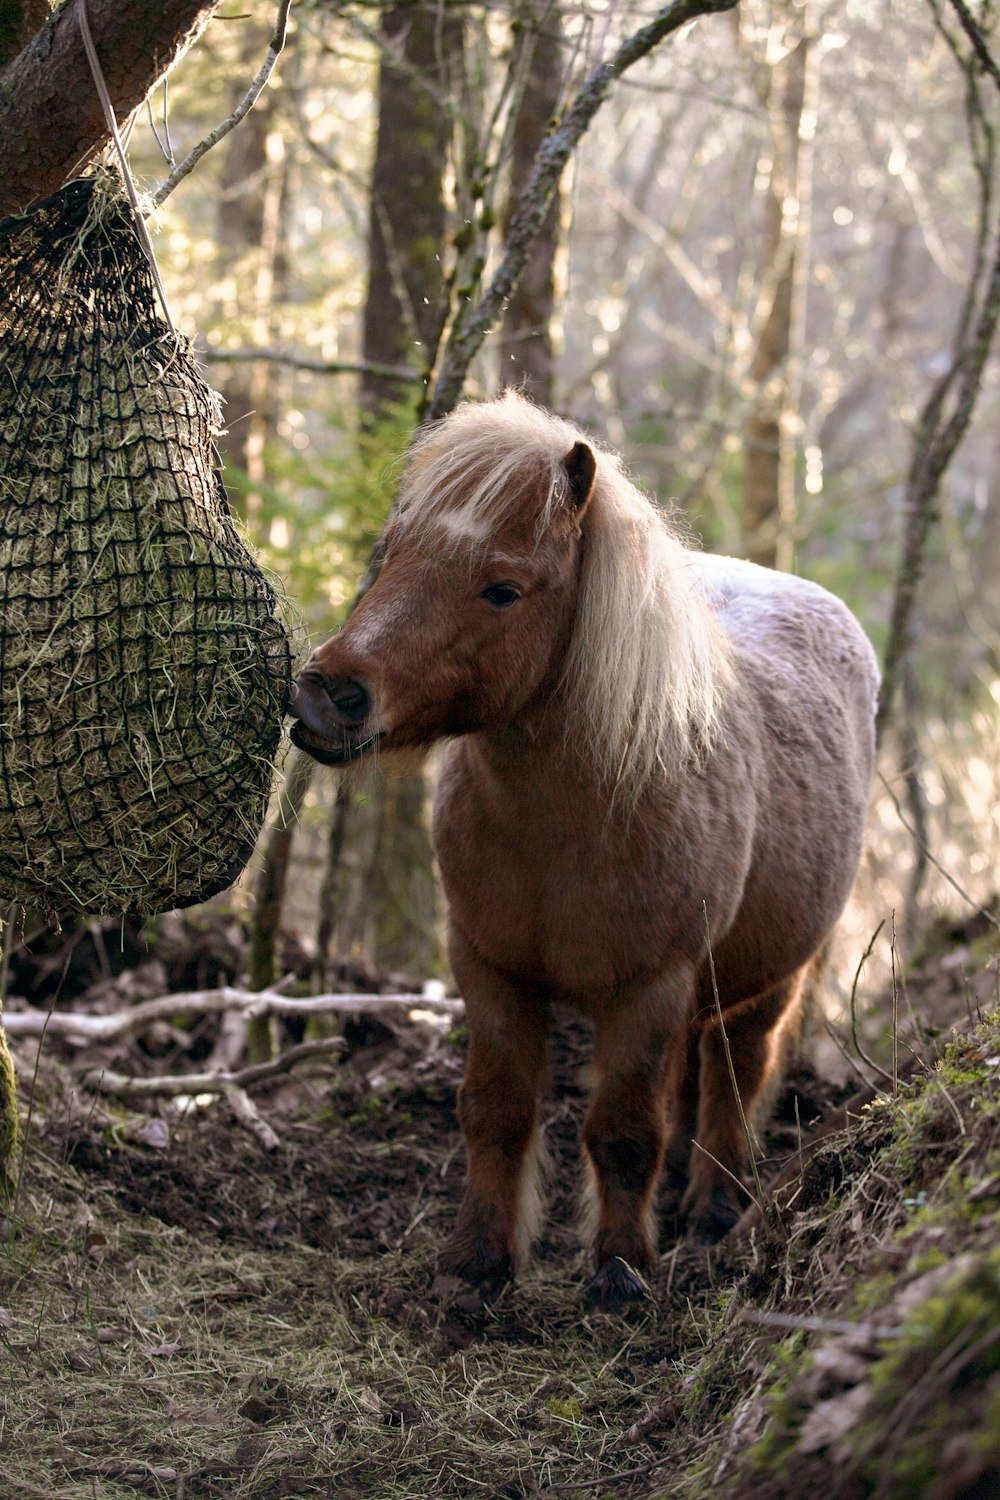 a small horse standing in a forest next to a tree